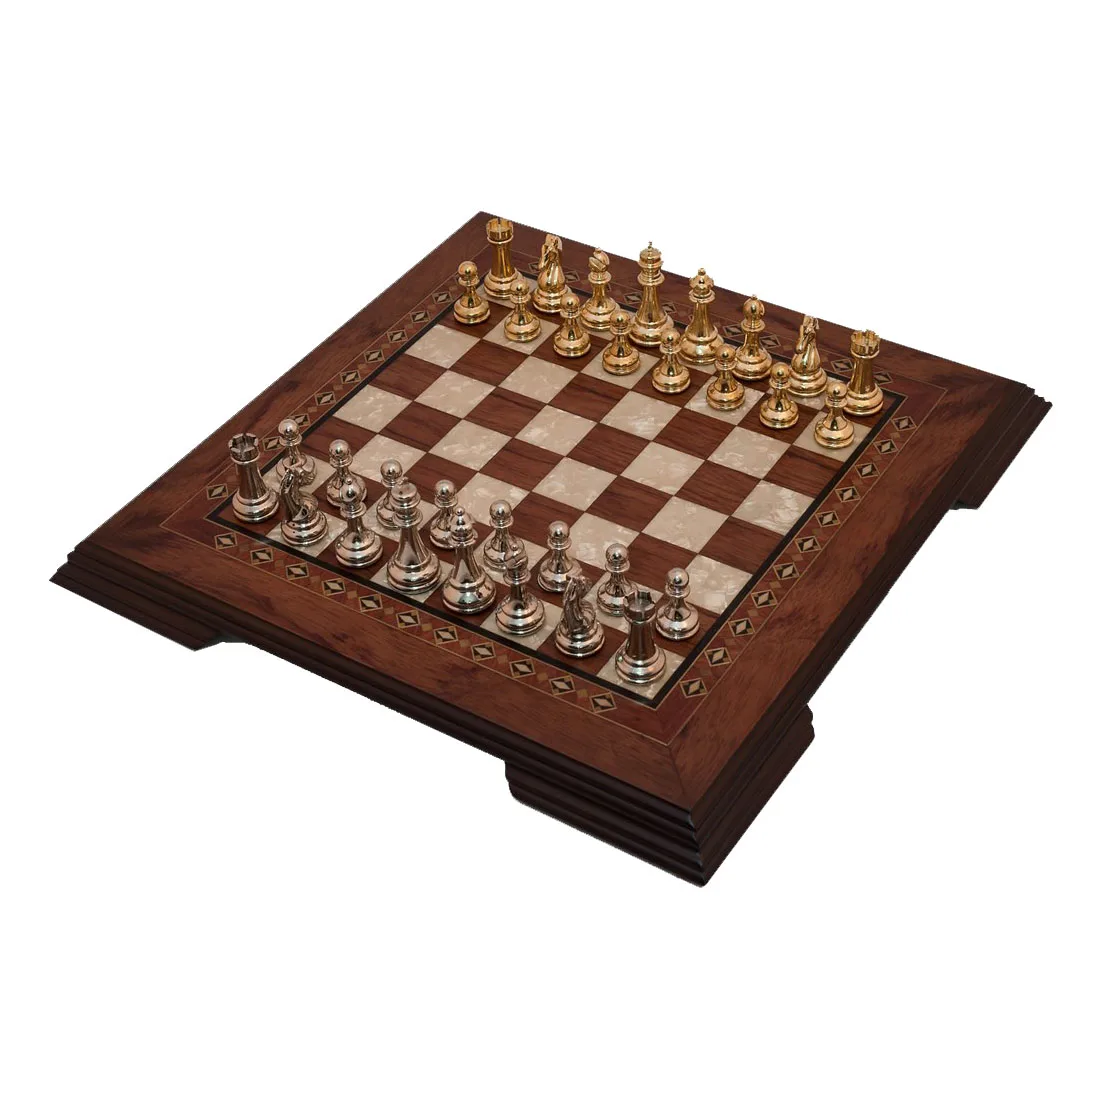 Solid Walnut Wood Chess Game Set - With Metal Figure - Footed Mosaic Engraved Chessboard Gift Items Шахматы осада или шахматы со смертью роман